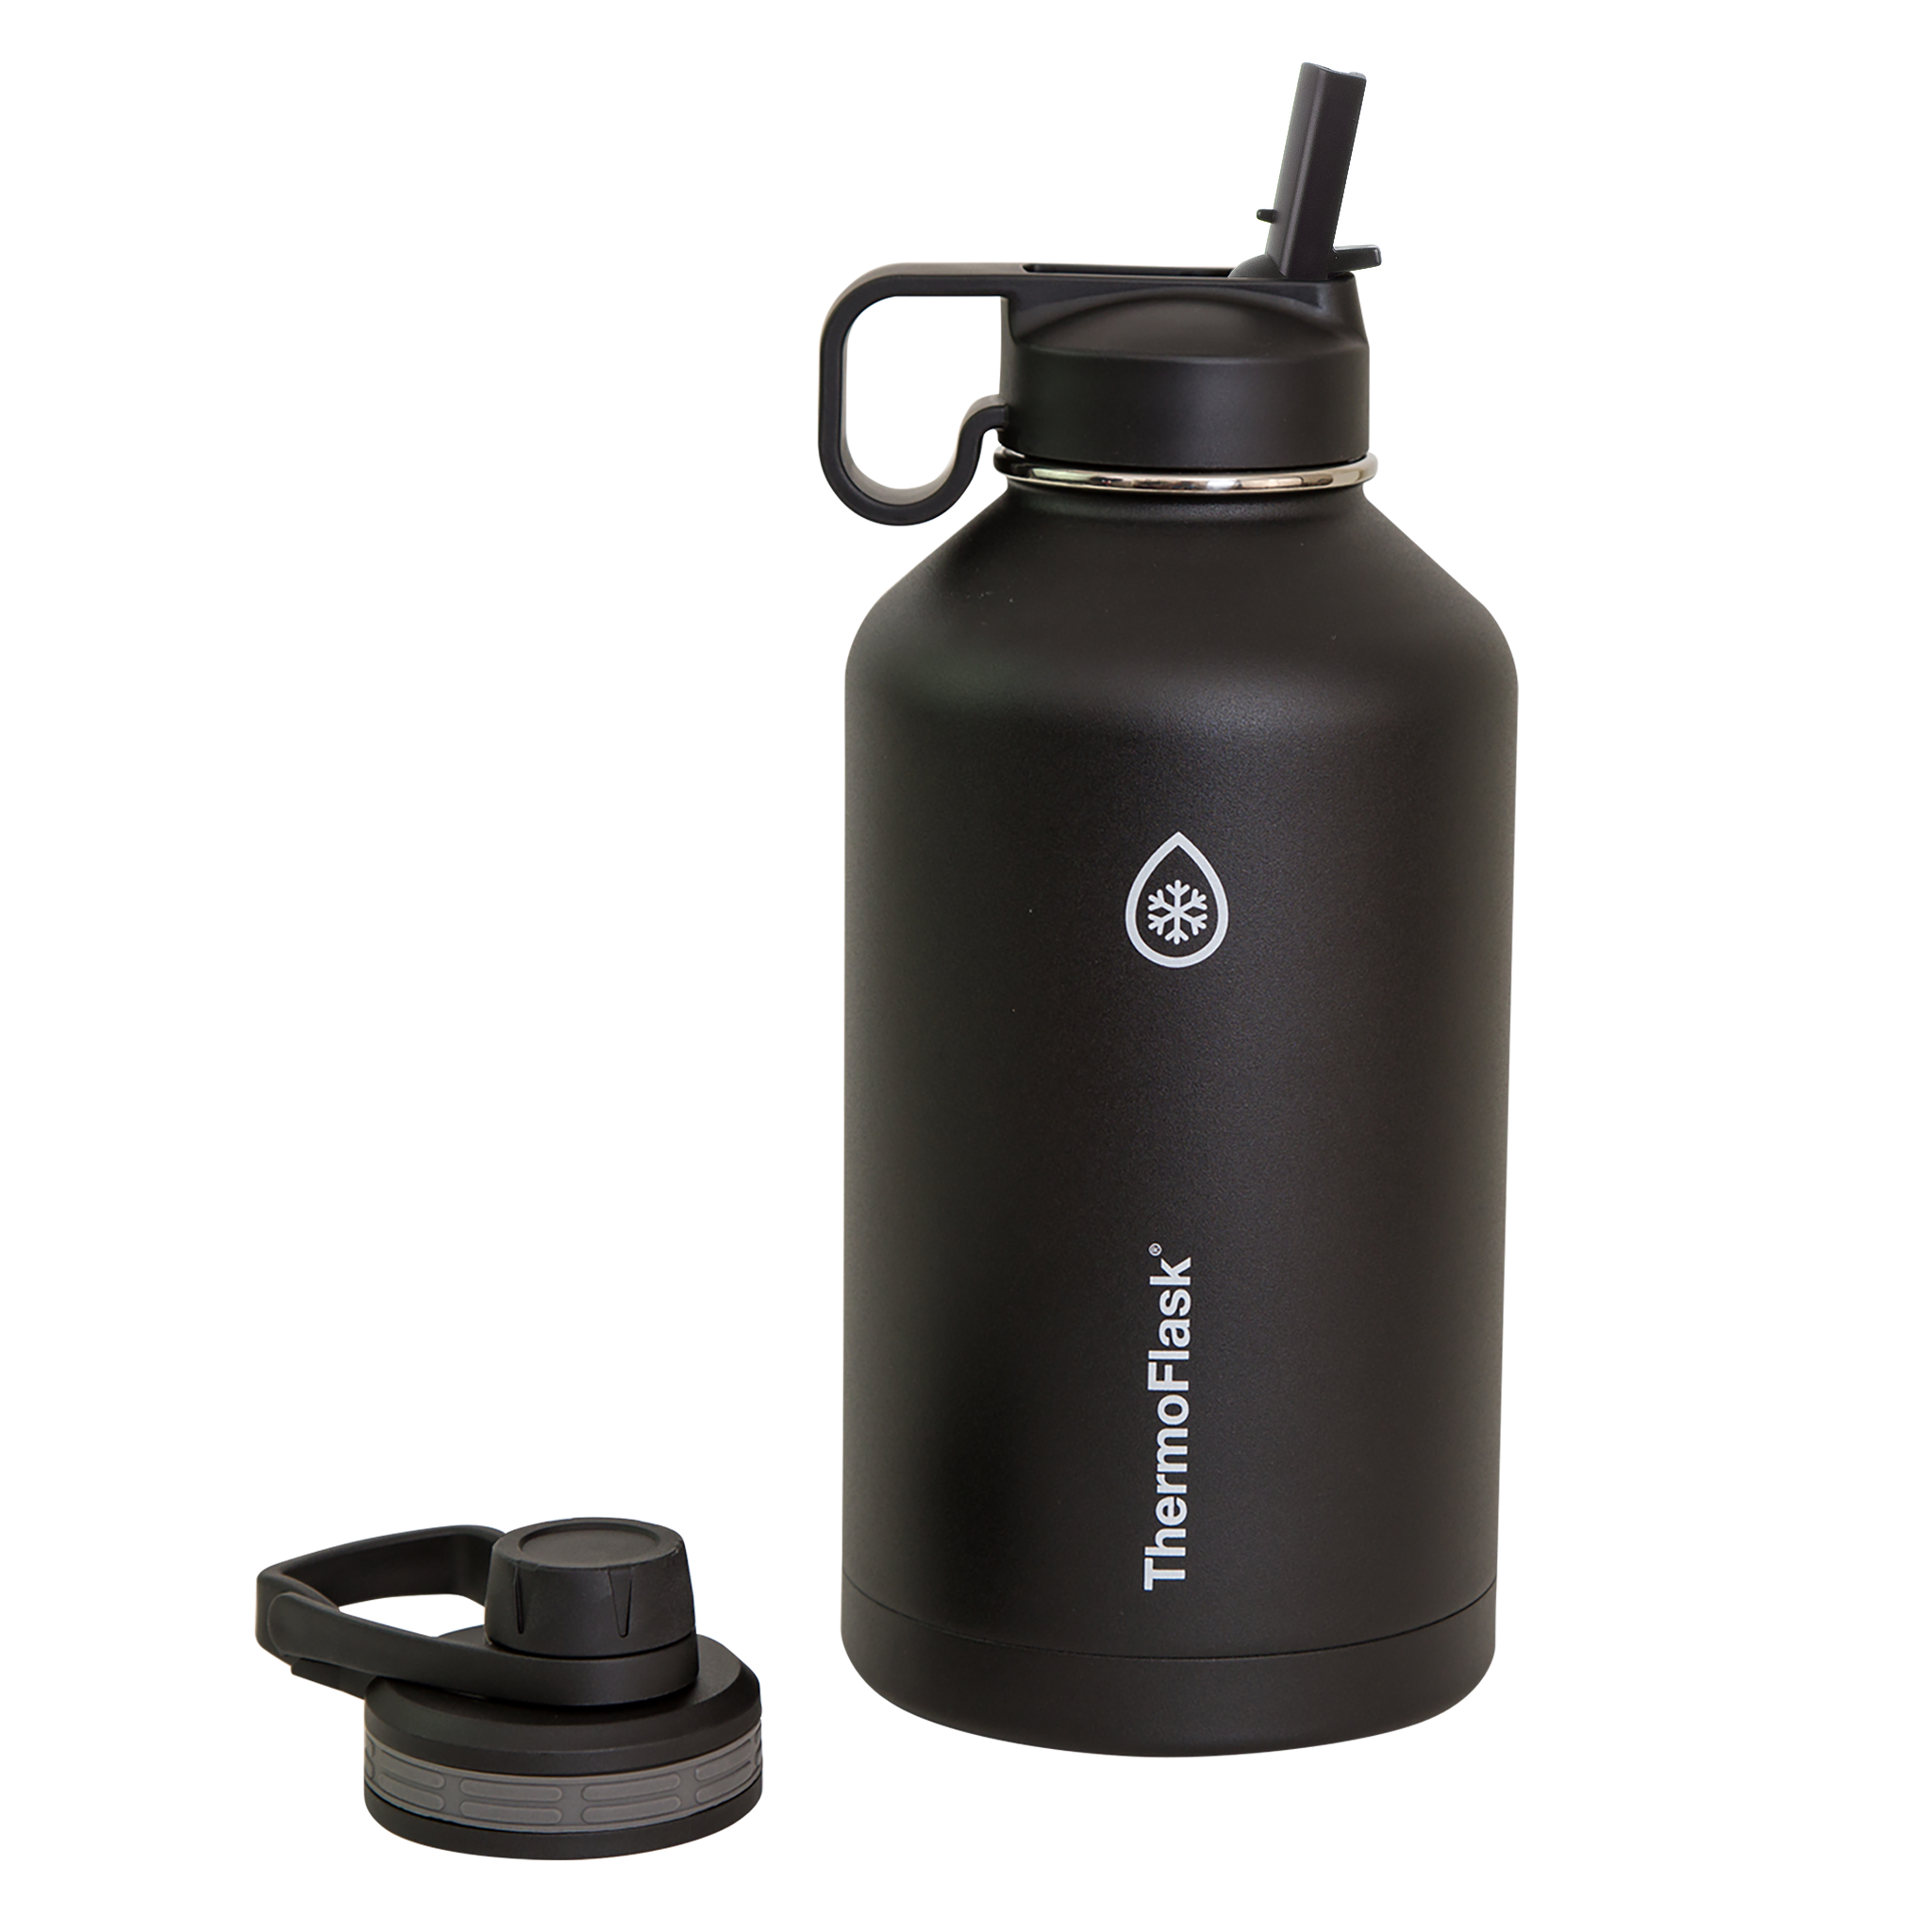 Thermoflask Double Stainless Steel Insulated Water Bottle 64 oz Black